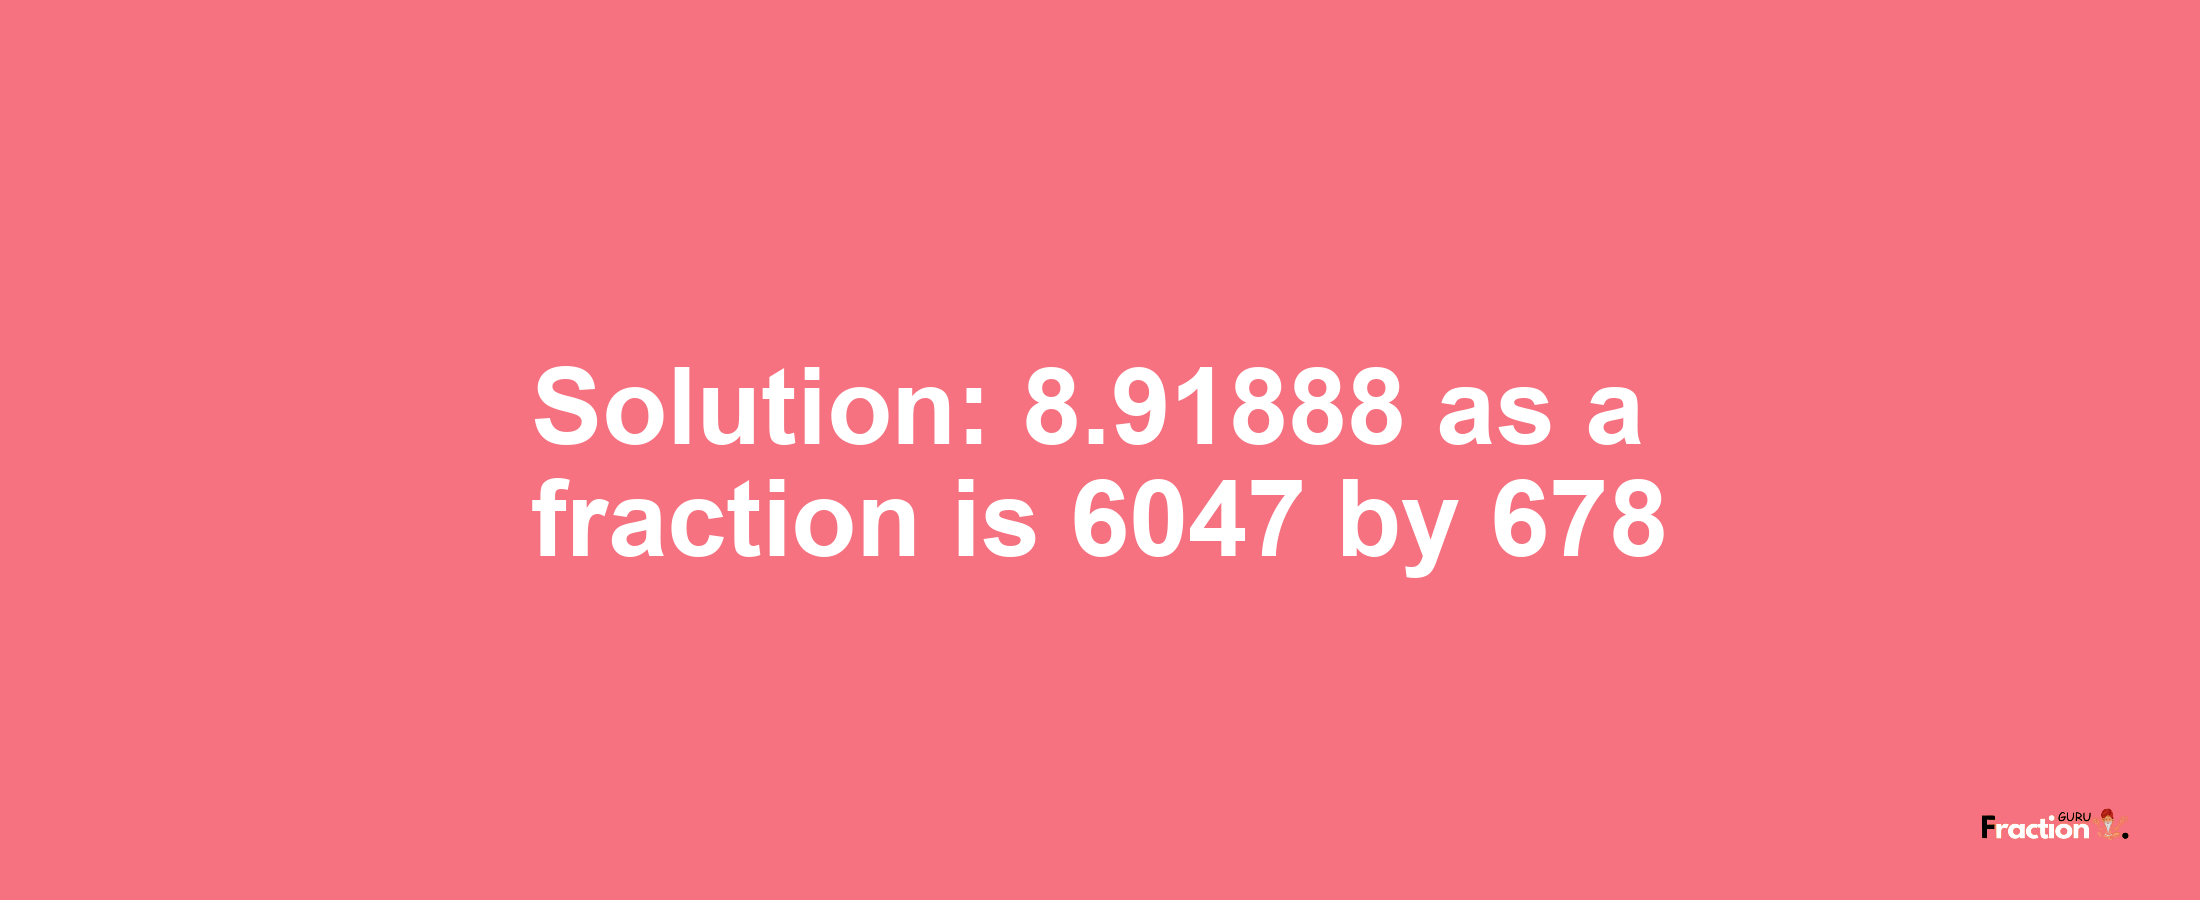 Solution:8.91888 as a fraction is 6047/678